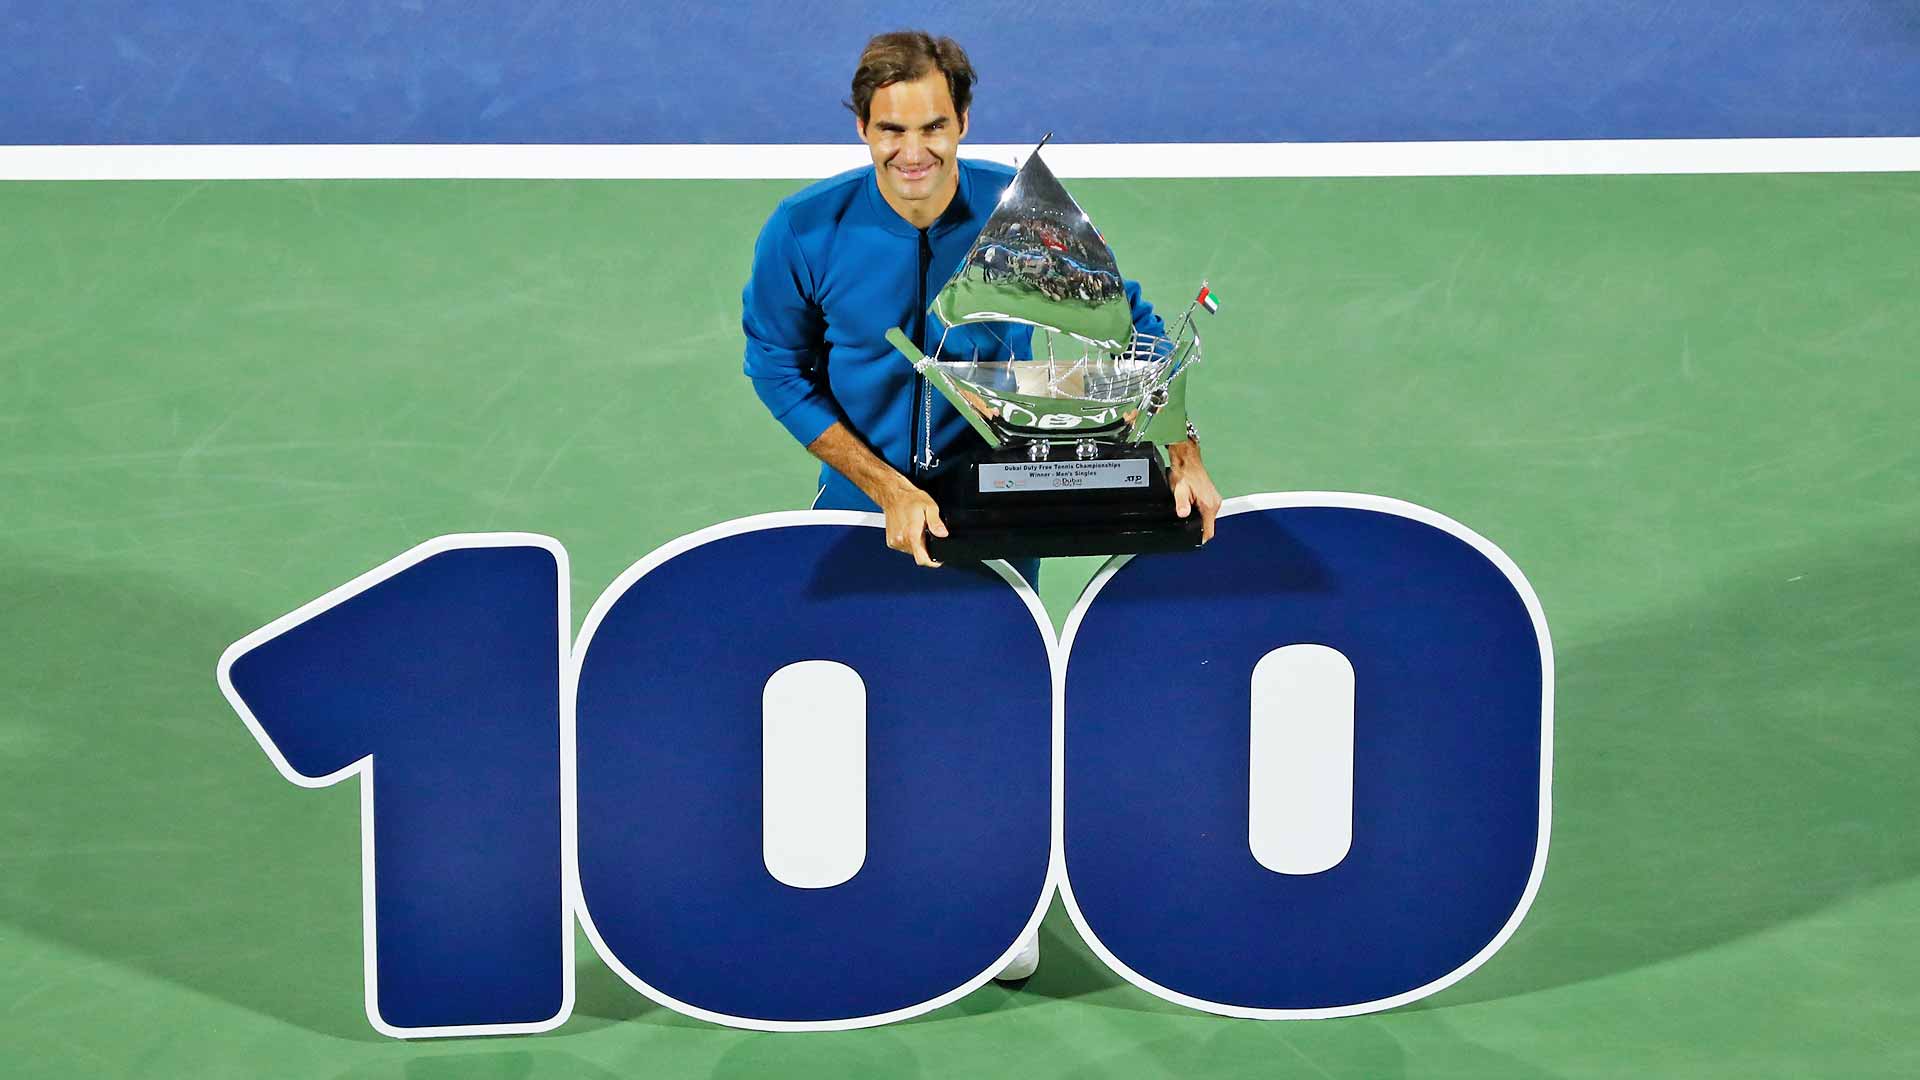 Roger Federer celebrates his 100th title after triumphing in Dubai